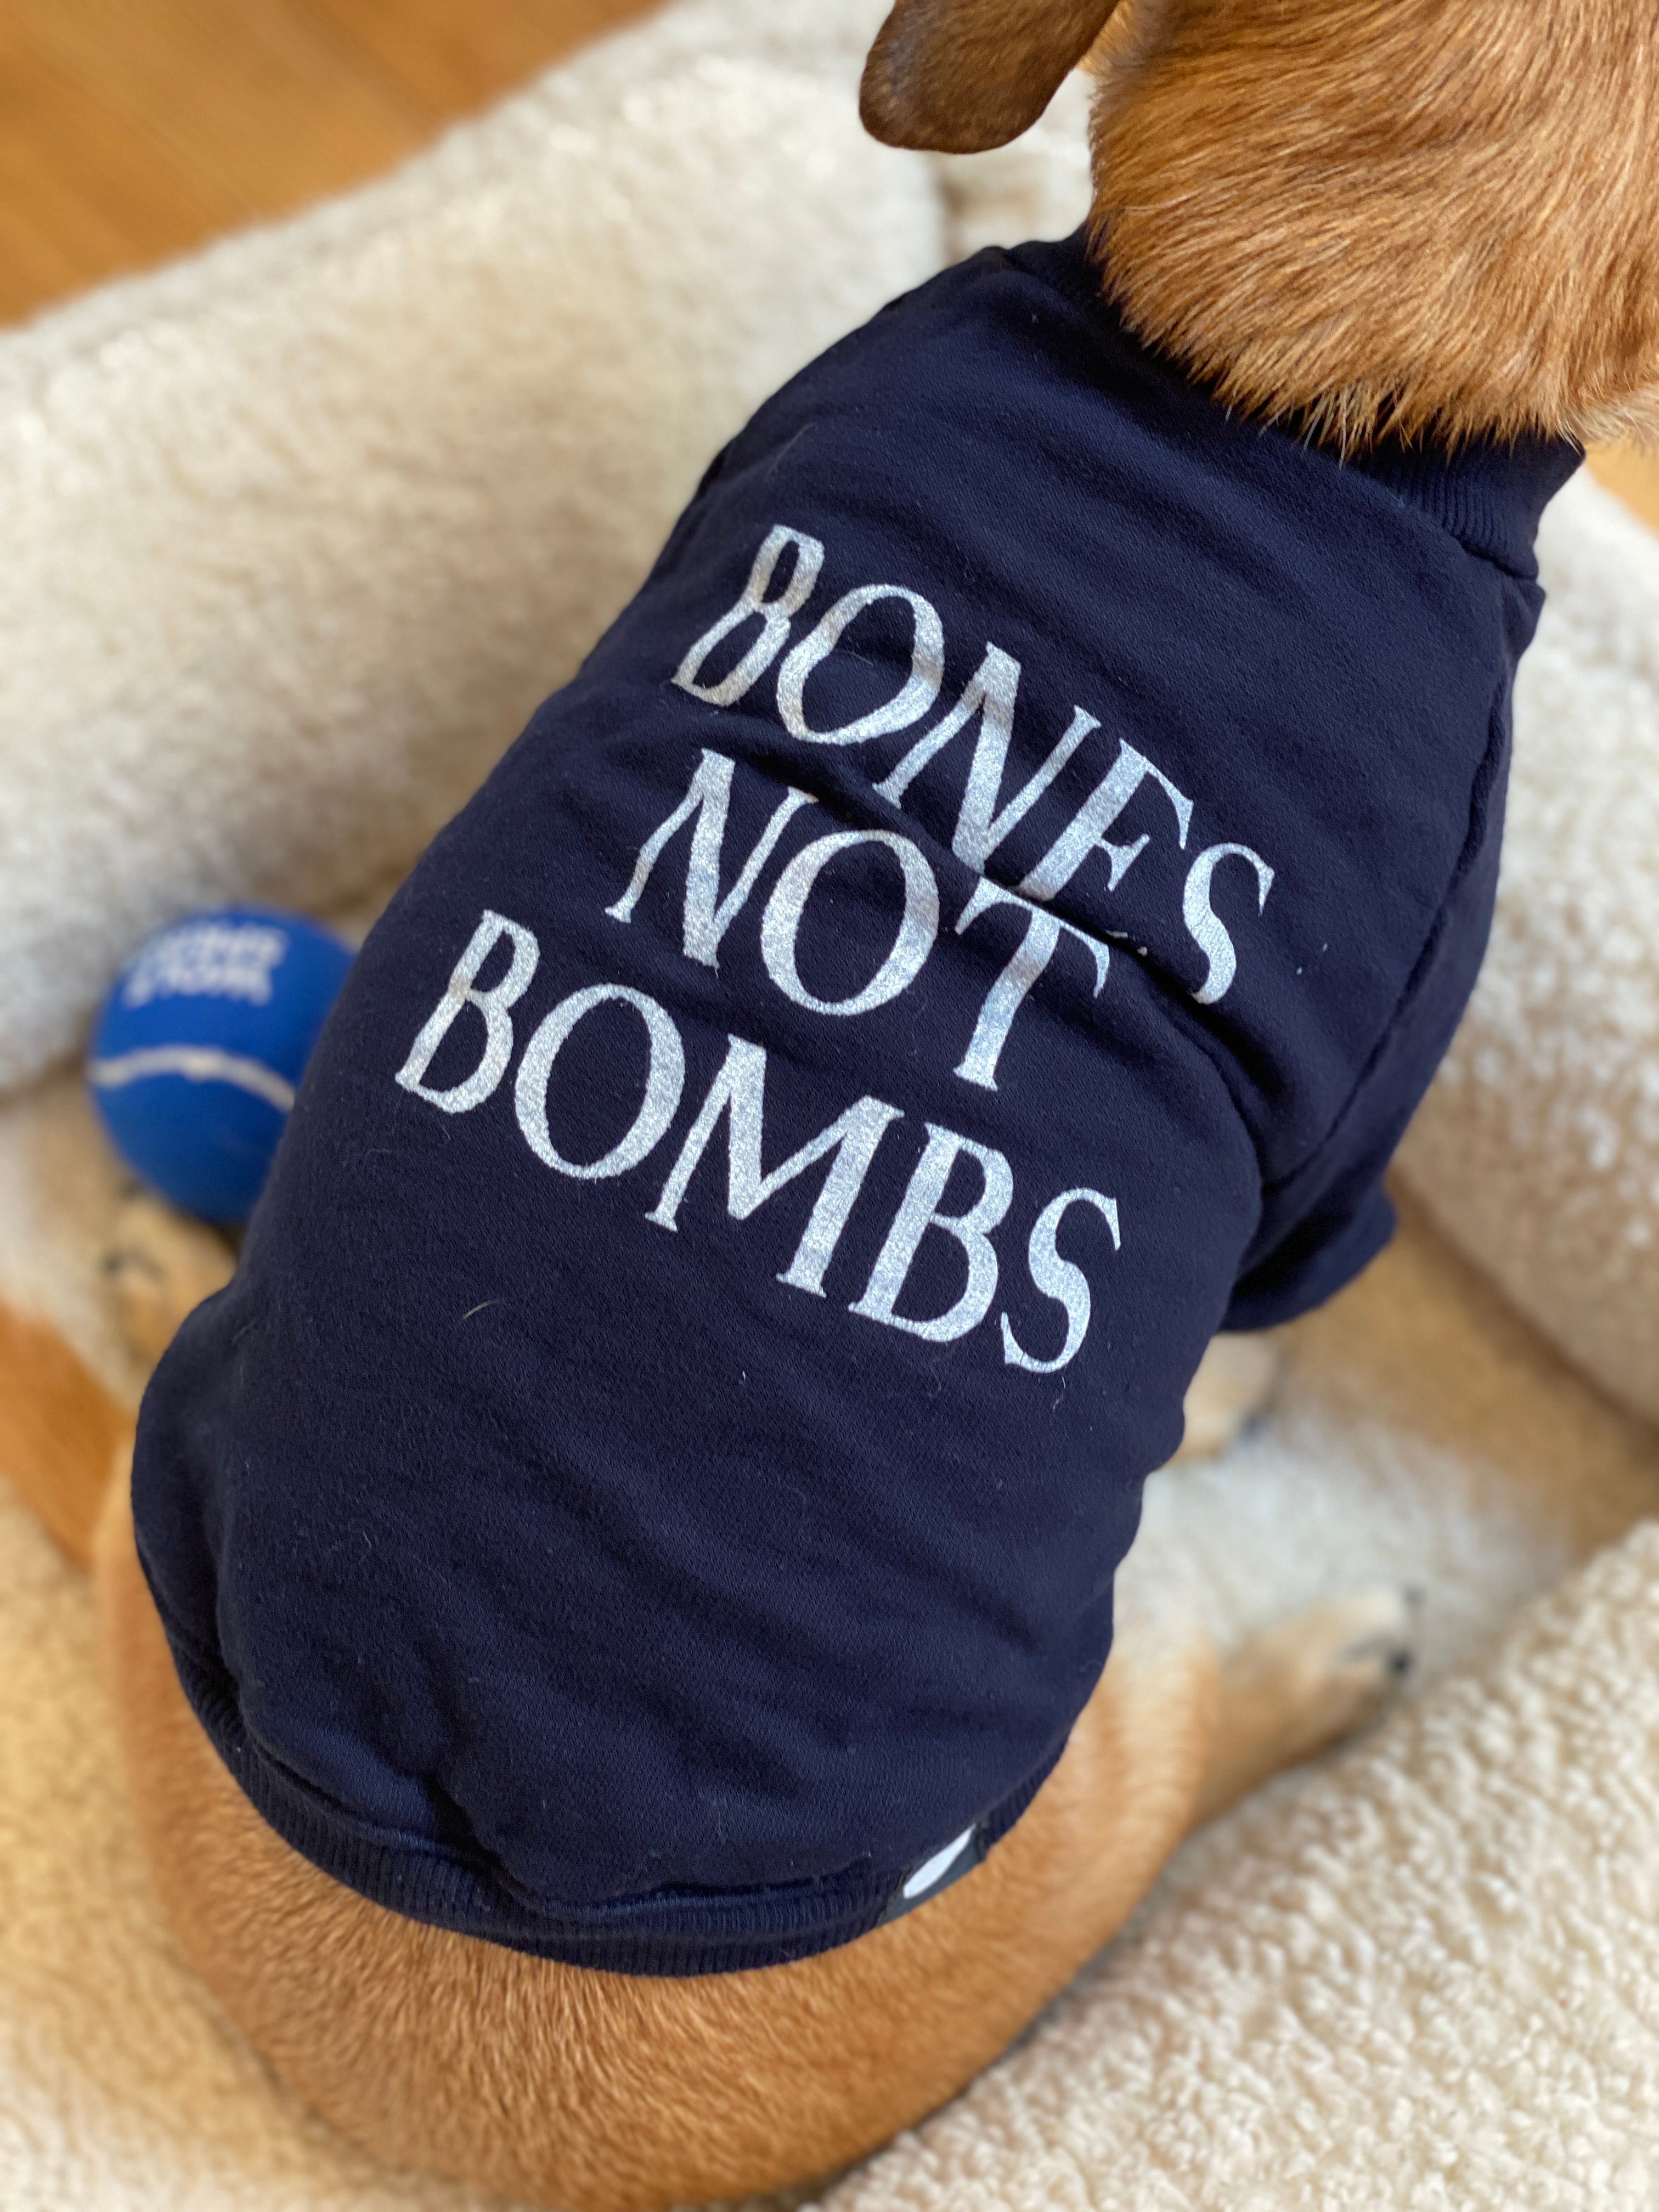 Cut-Sleeve  Bones Not Bombs  T-Shirt (Made in the USA)